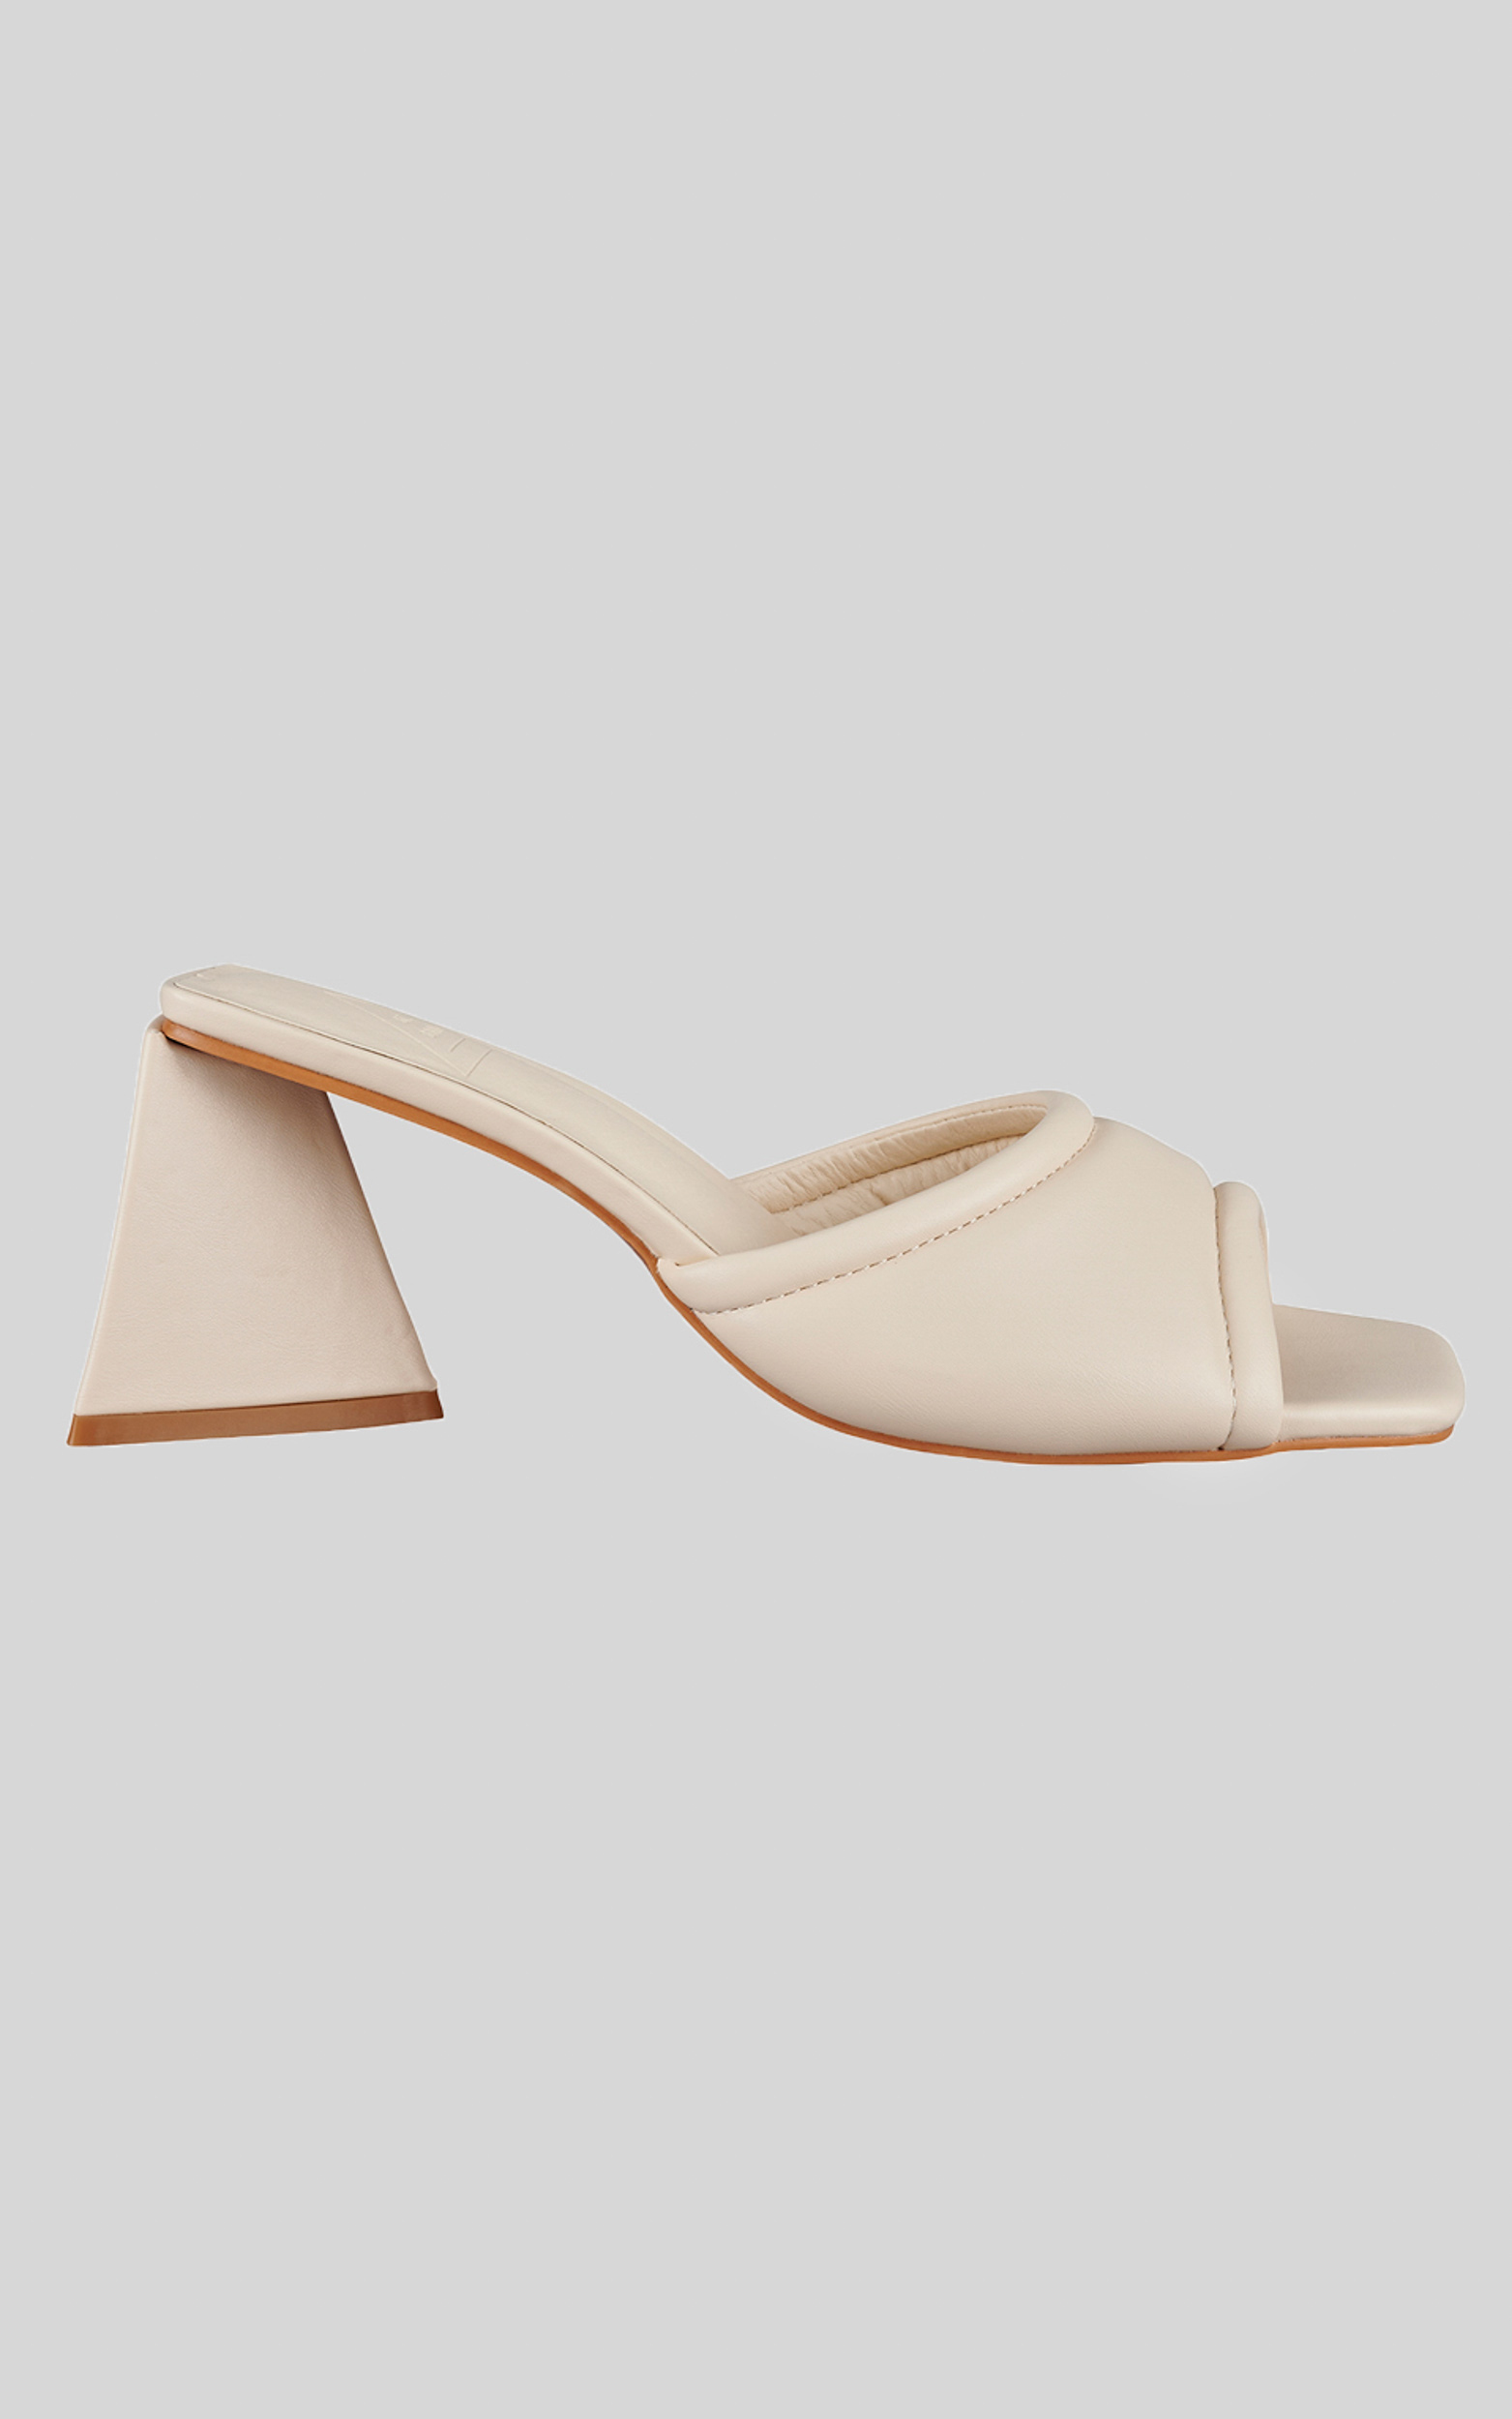 St Sana - Tycho Mule Heels in Off White - 05, WHT2, hi-res image number null